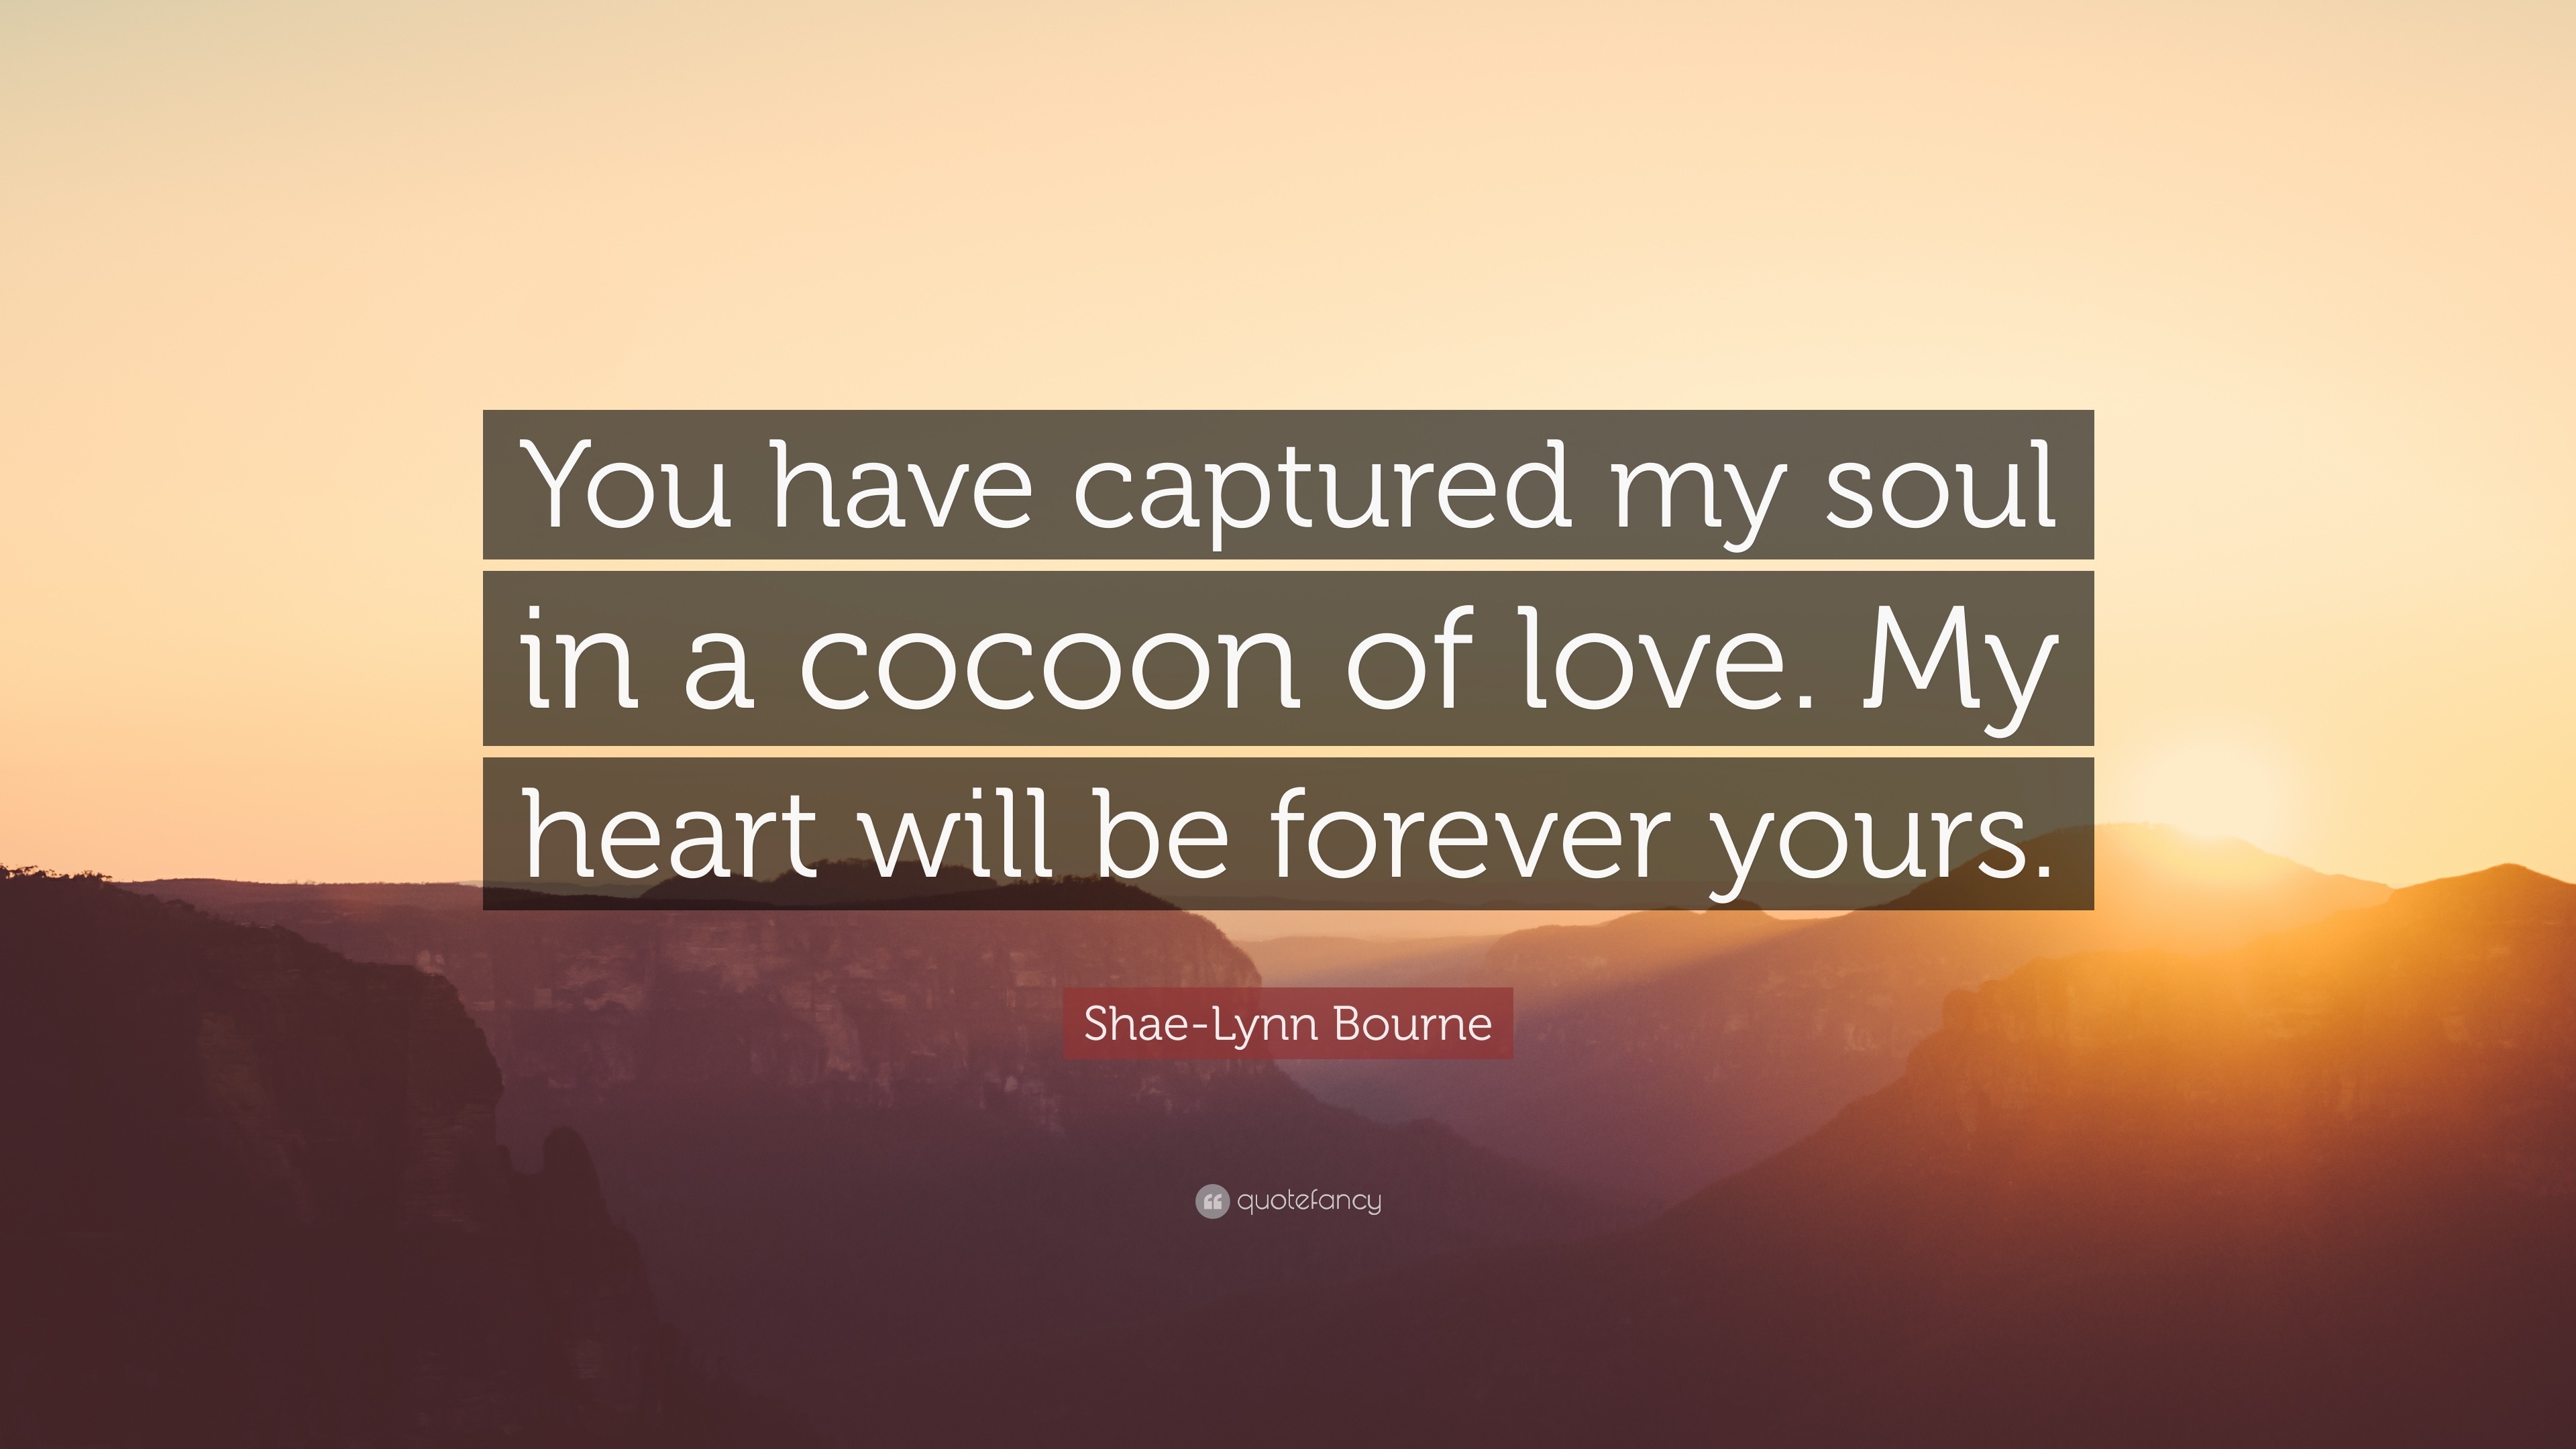 Shae-Lynn Bourne Quote: “You have captured my soul in a cocoon of love ...